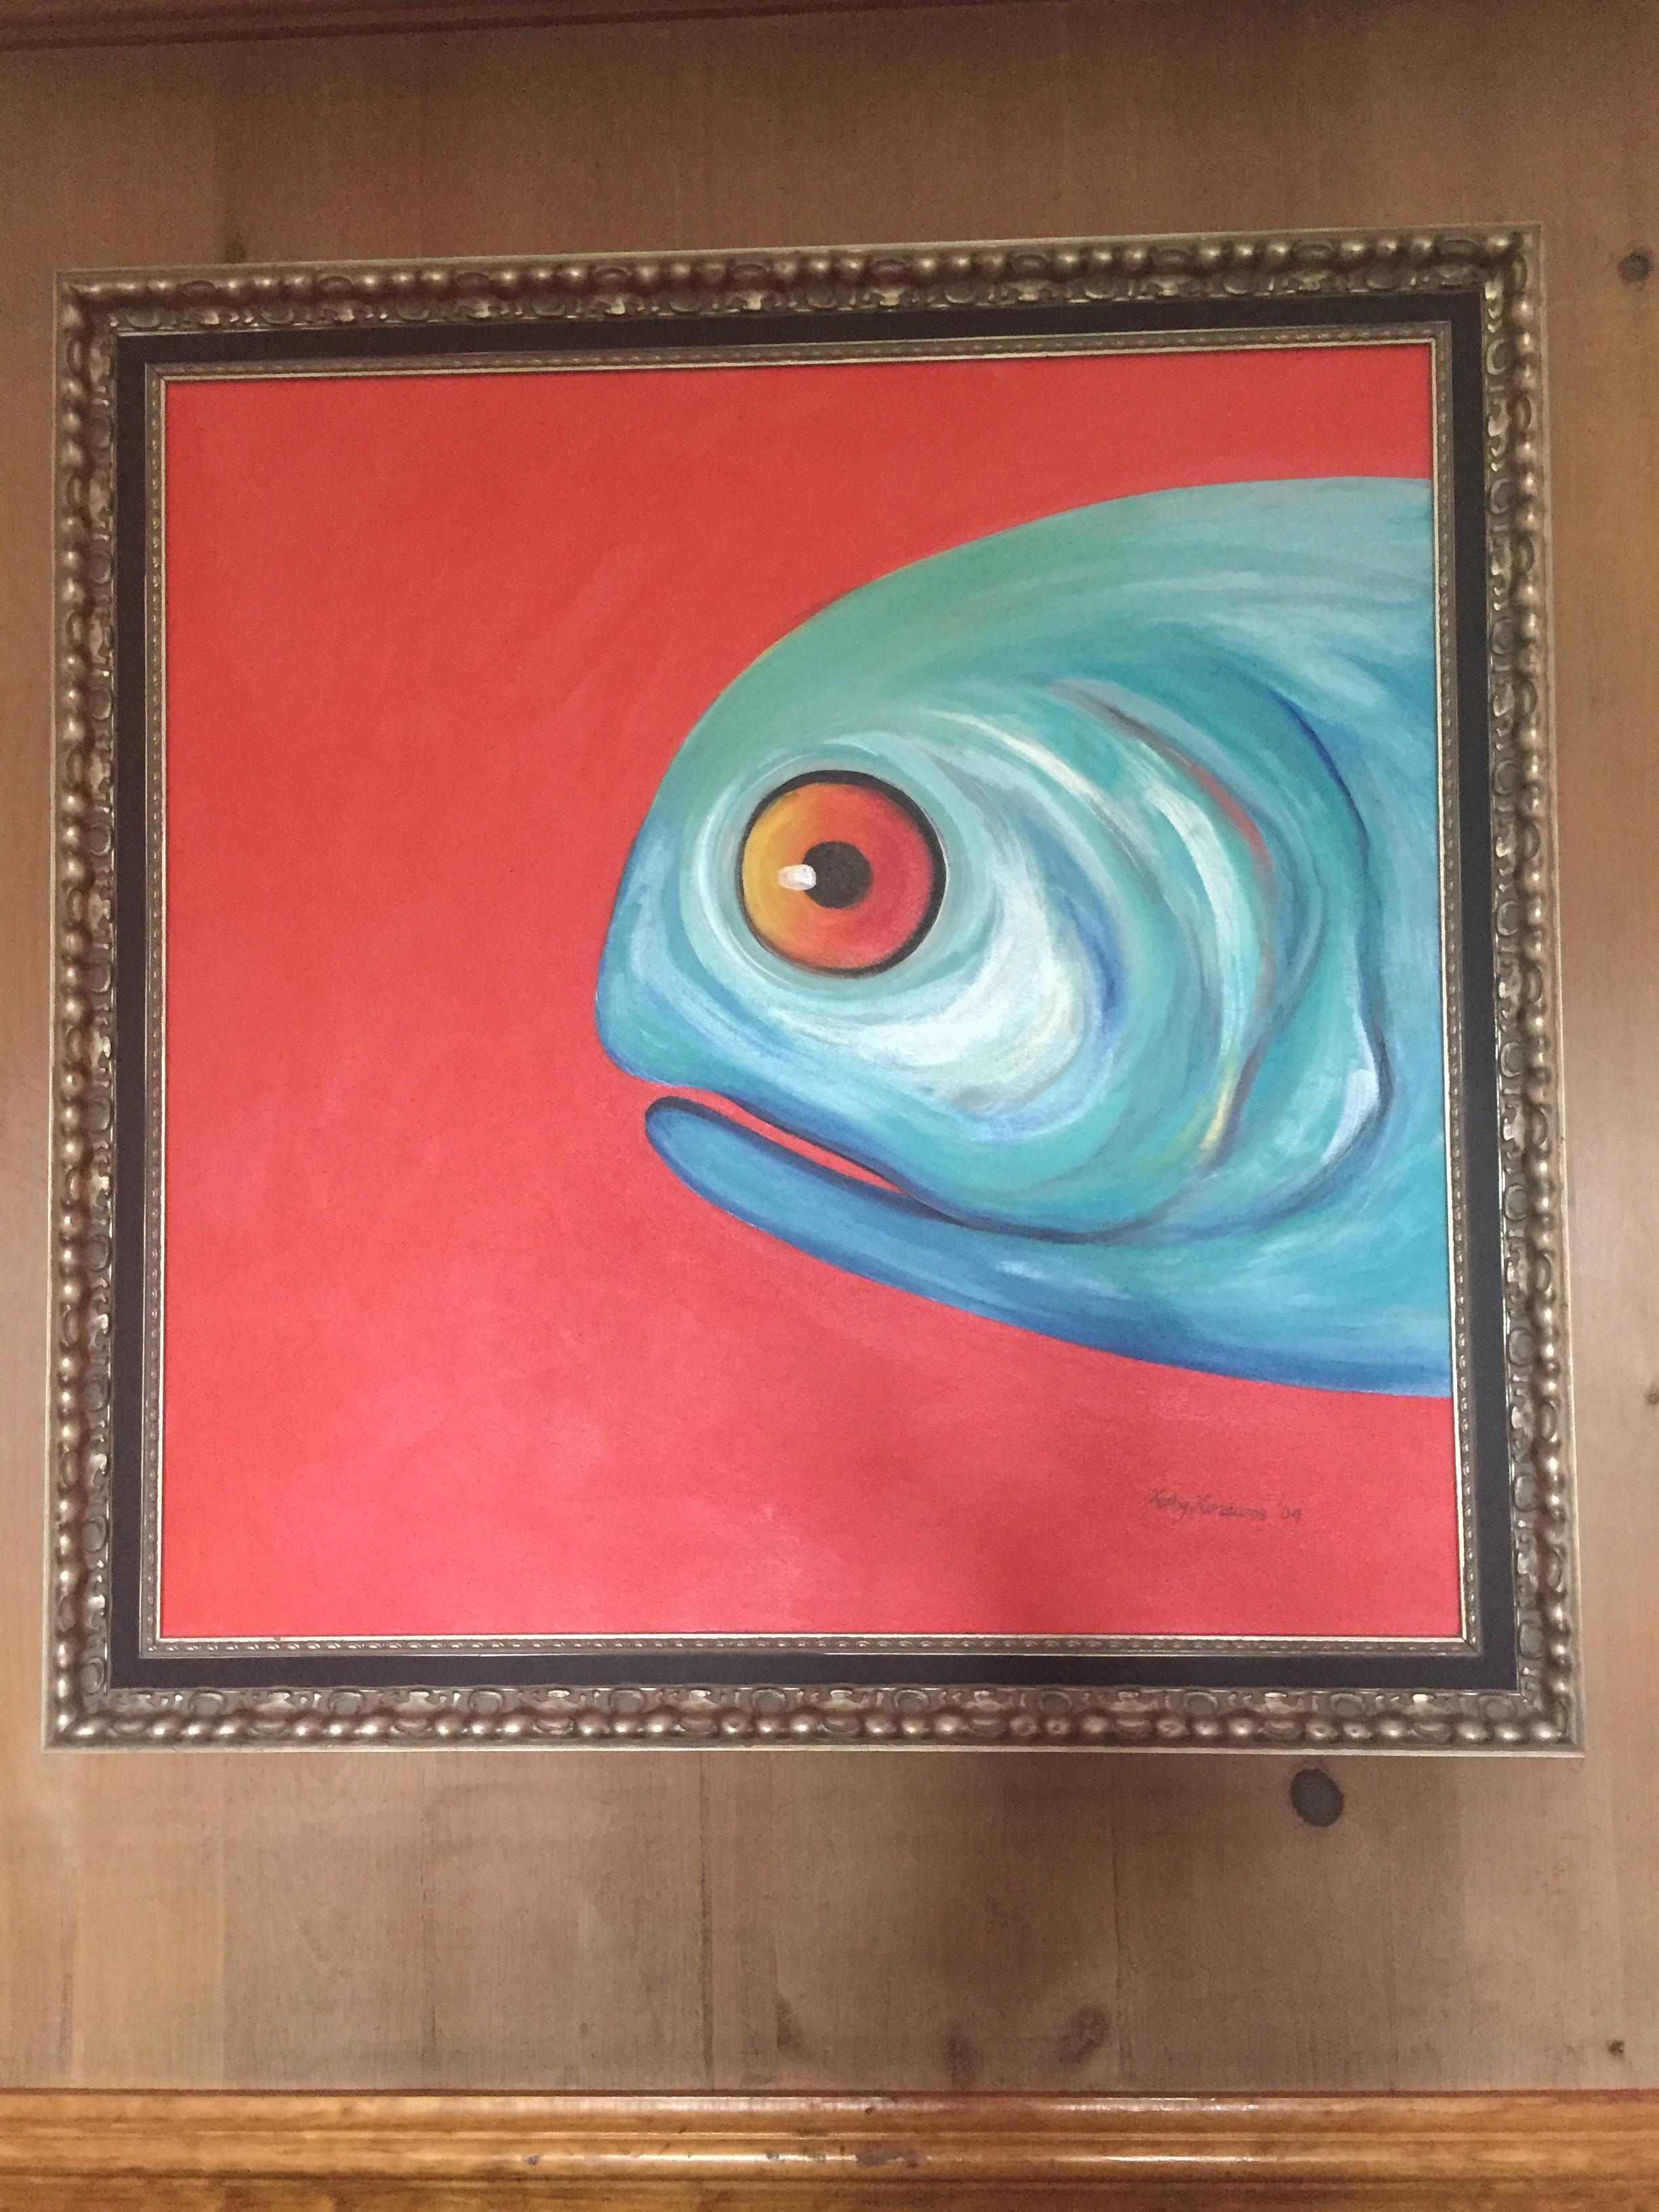 The fish has seen some shit.